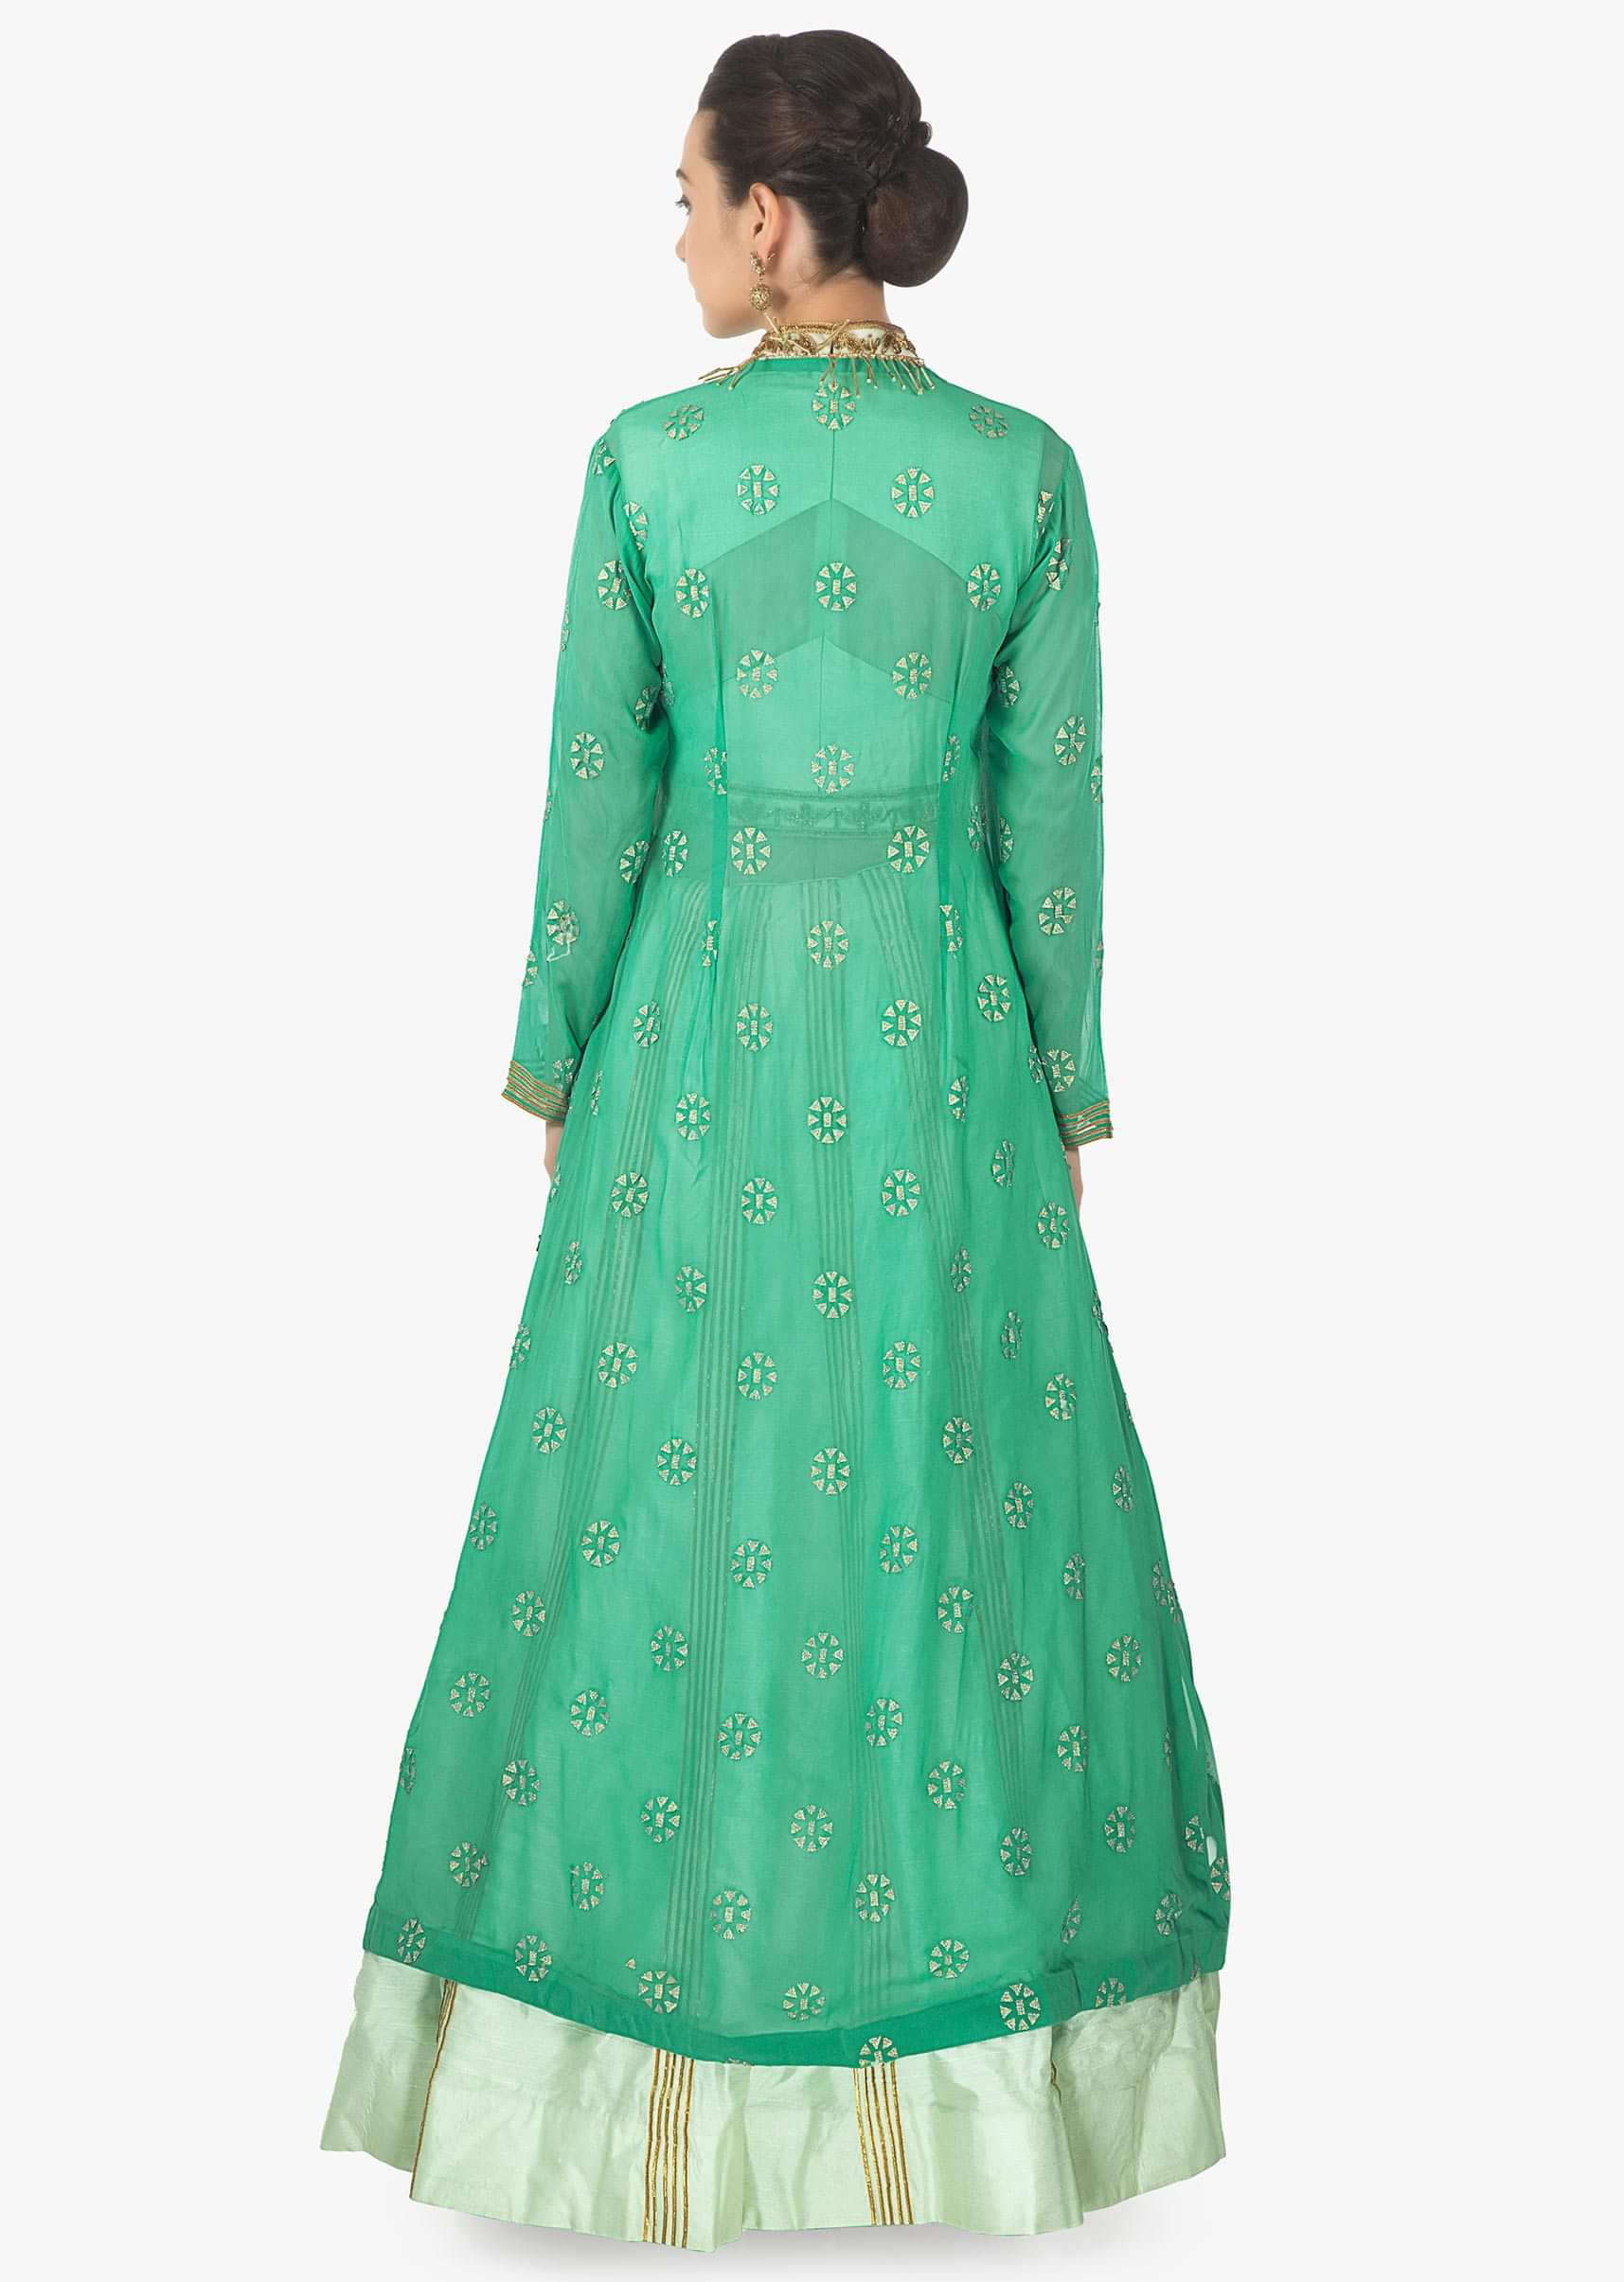 Mint green lehenga with embroidered blouse matched with long jacket in tassel only on Kalki